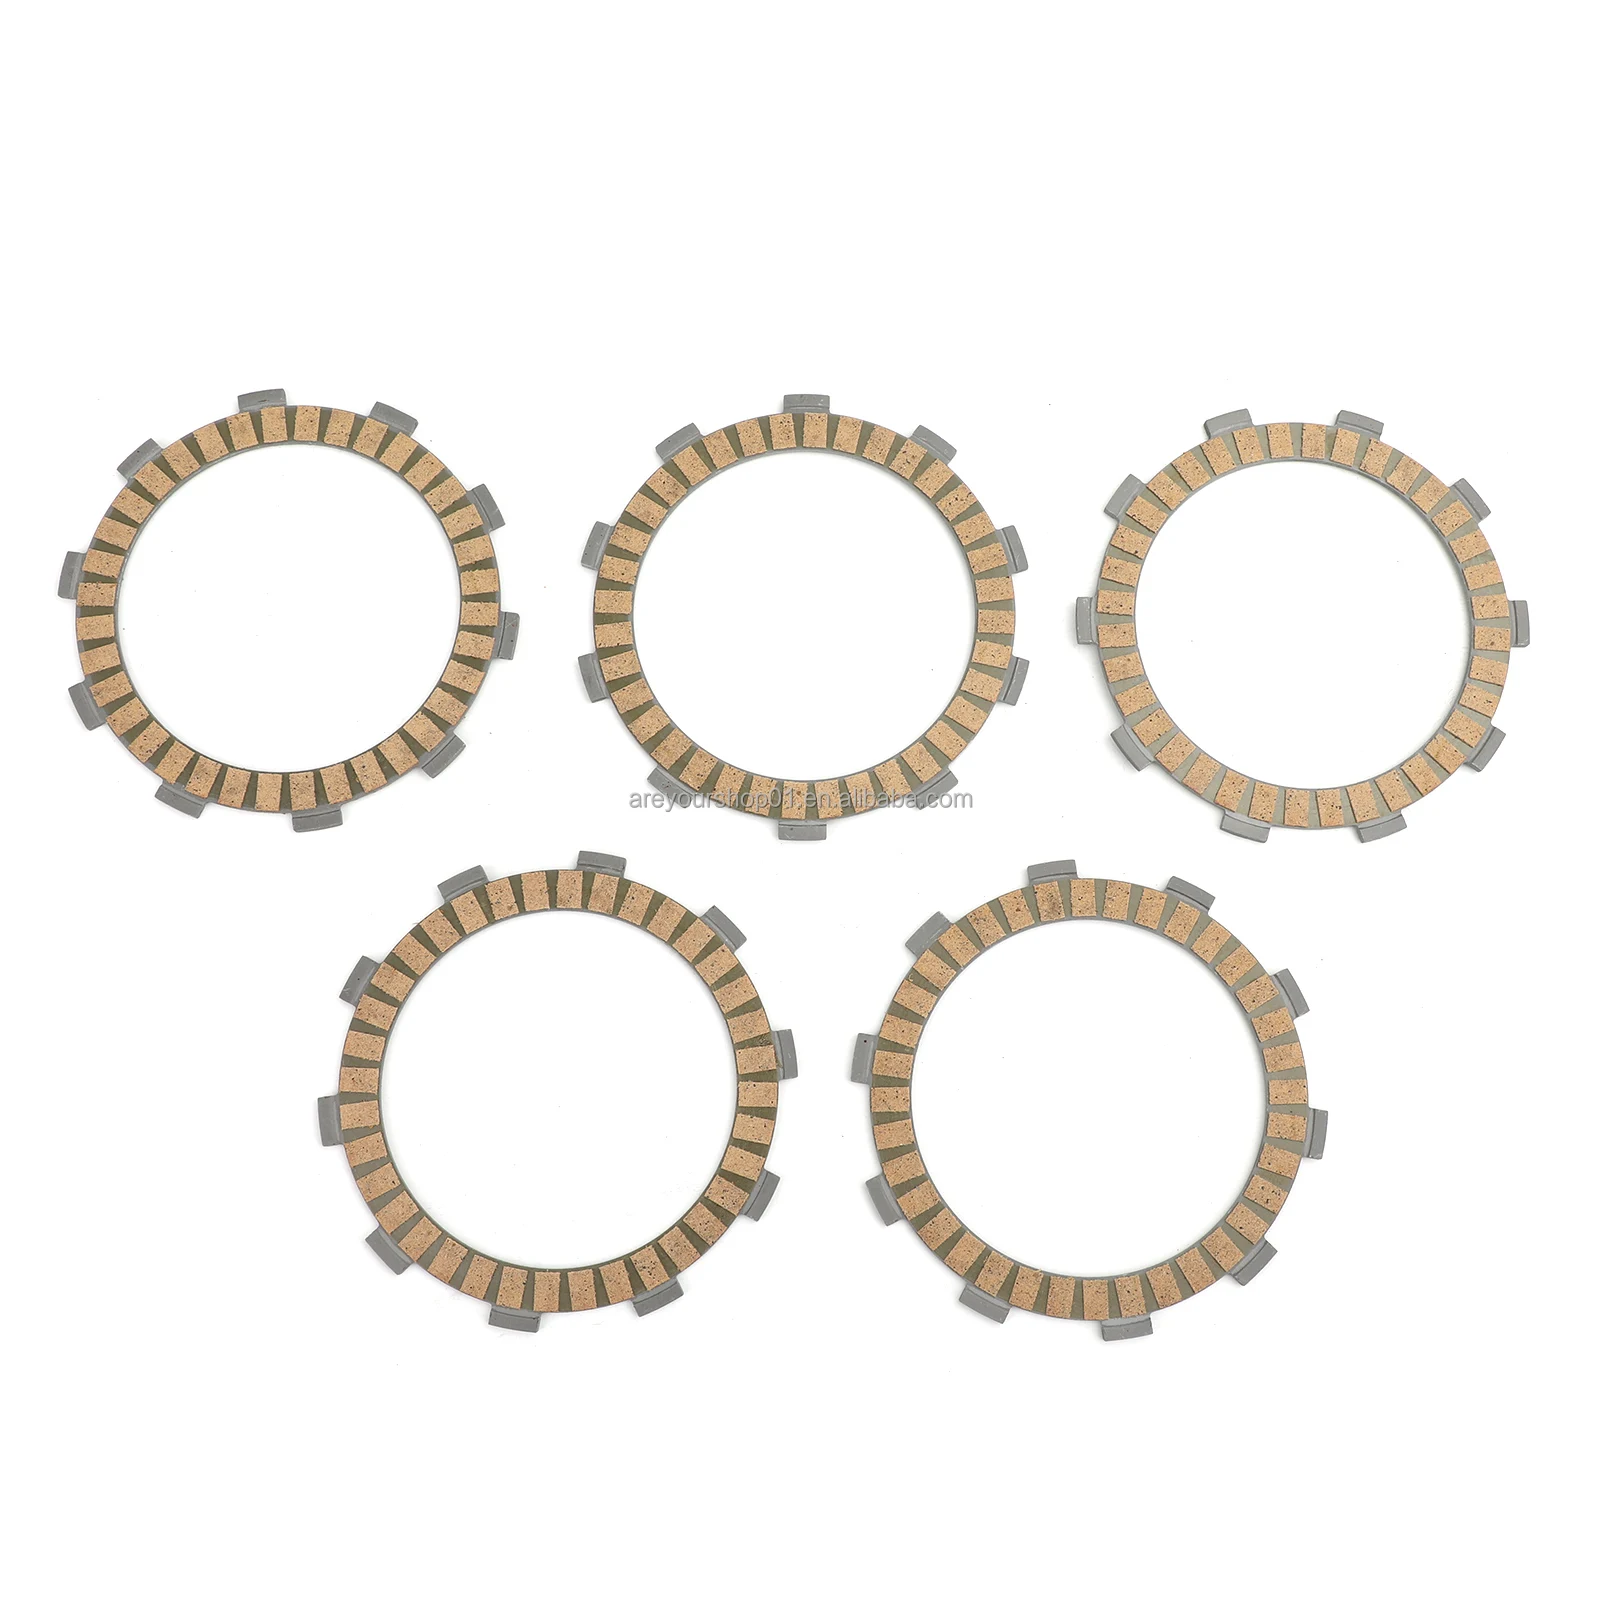 Areyourshop Clutch Friction Plate Kit Set For Yamaha Sr185 H J Xt0 J K Ty125 Yz125 X C F G Buy Hot Sale Clutch Pressure Plate Clutch Plate Clutch Disc Clutch Plates Clutch Cover Product On Alibaba Com